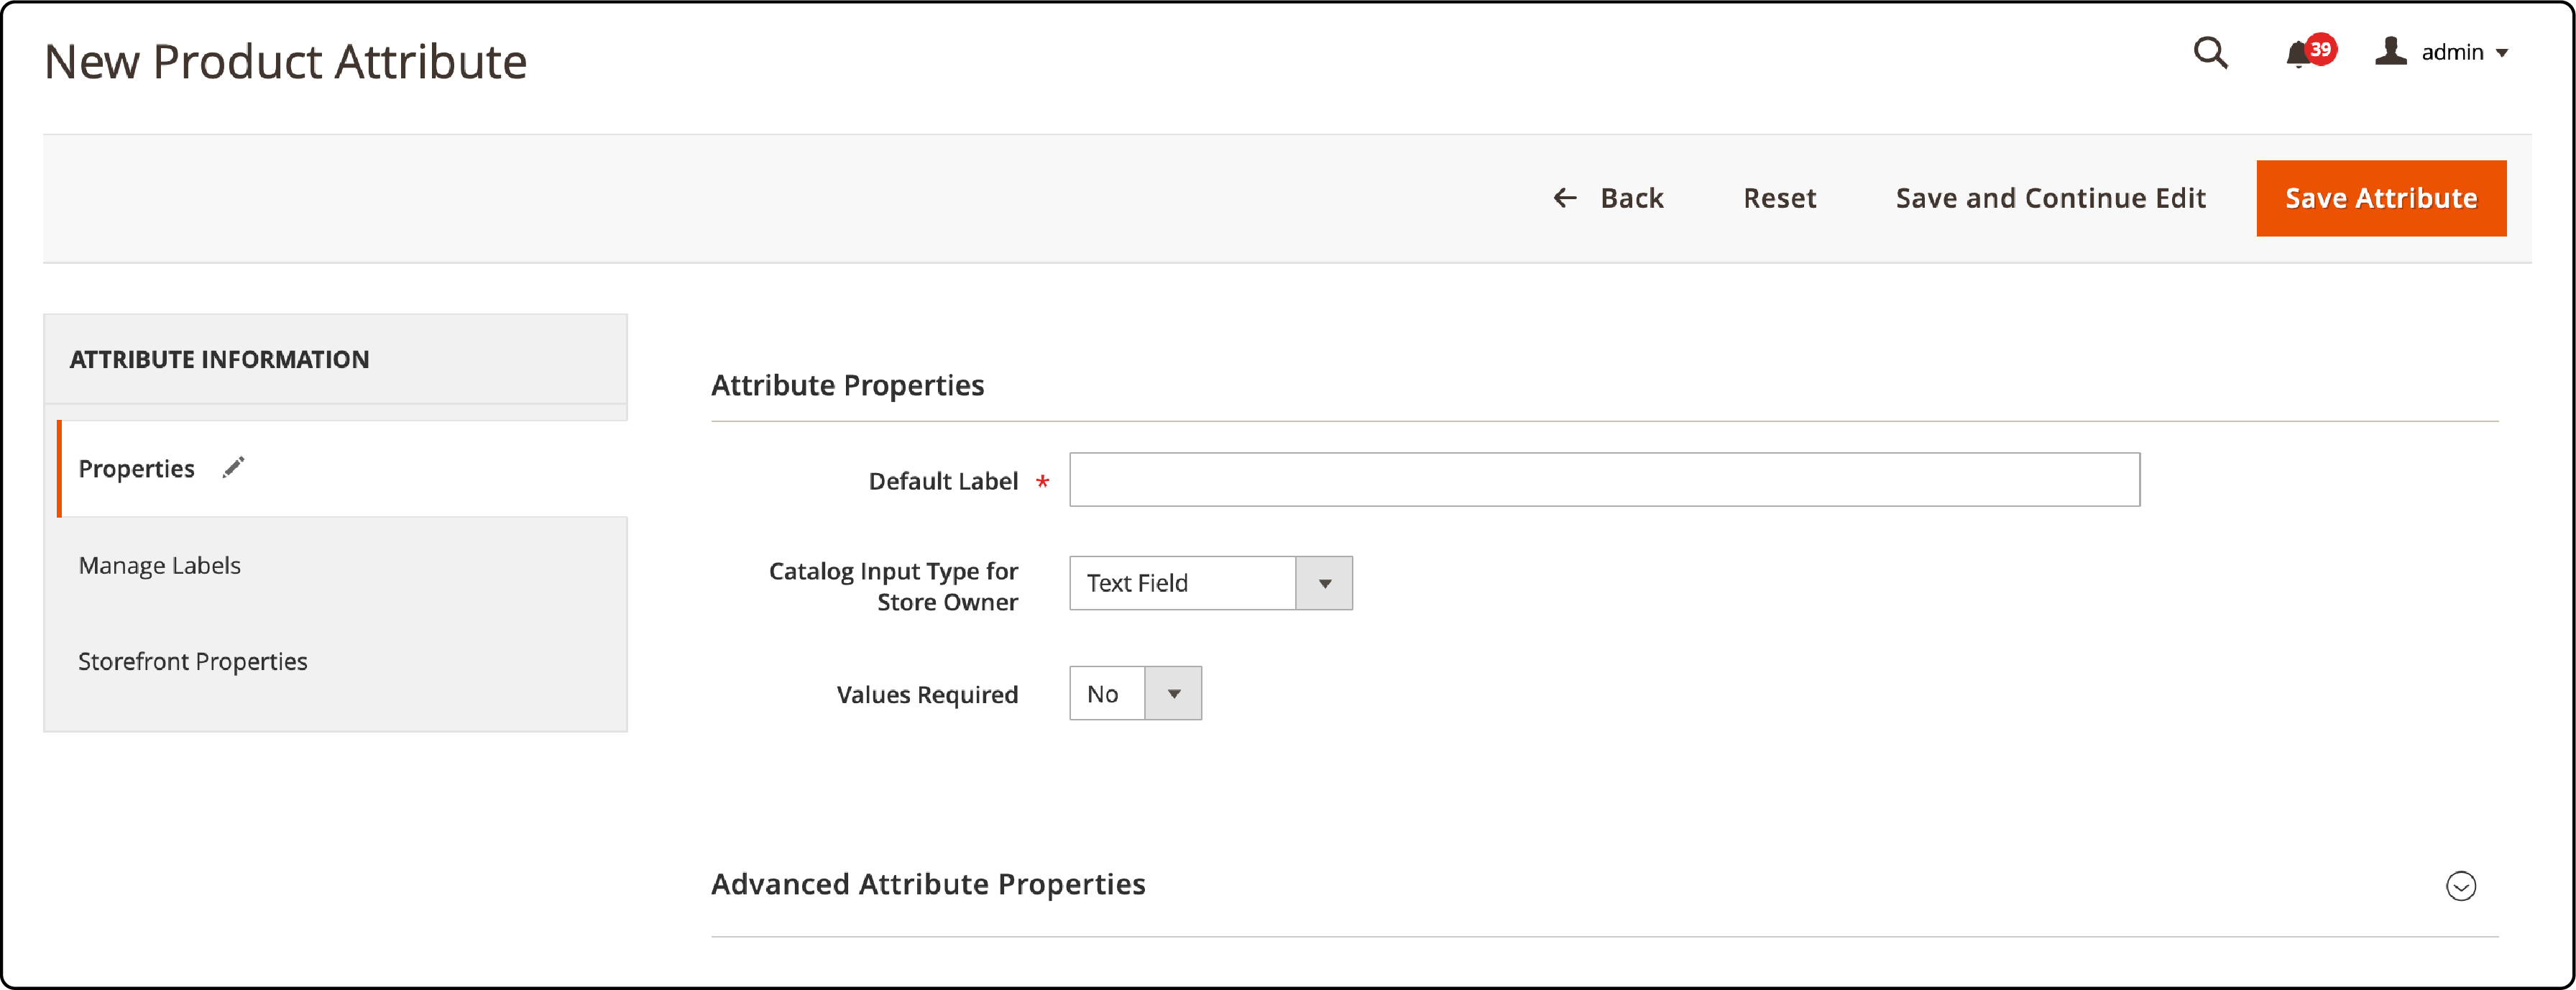 Step-by-step guide to adding a new product attribute in Magento 2